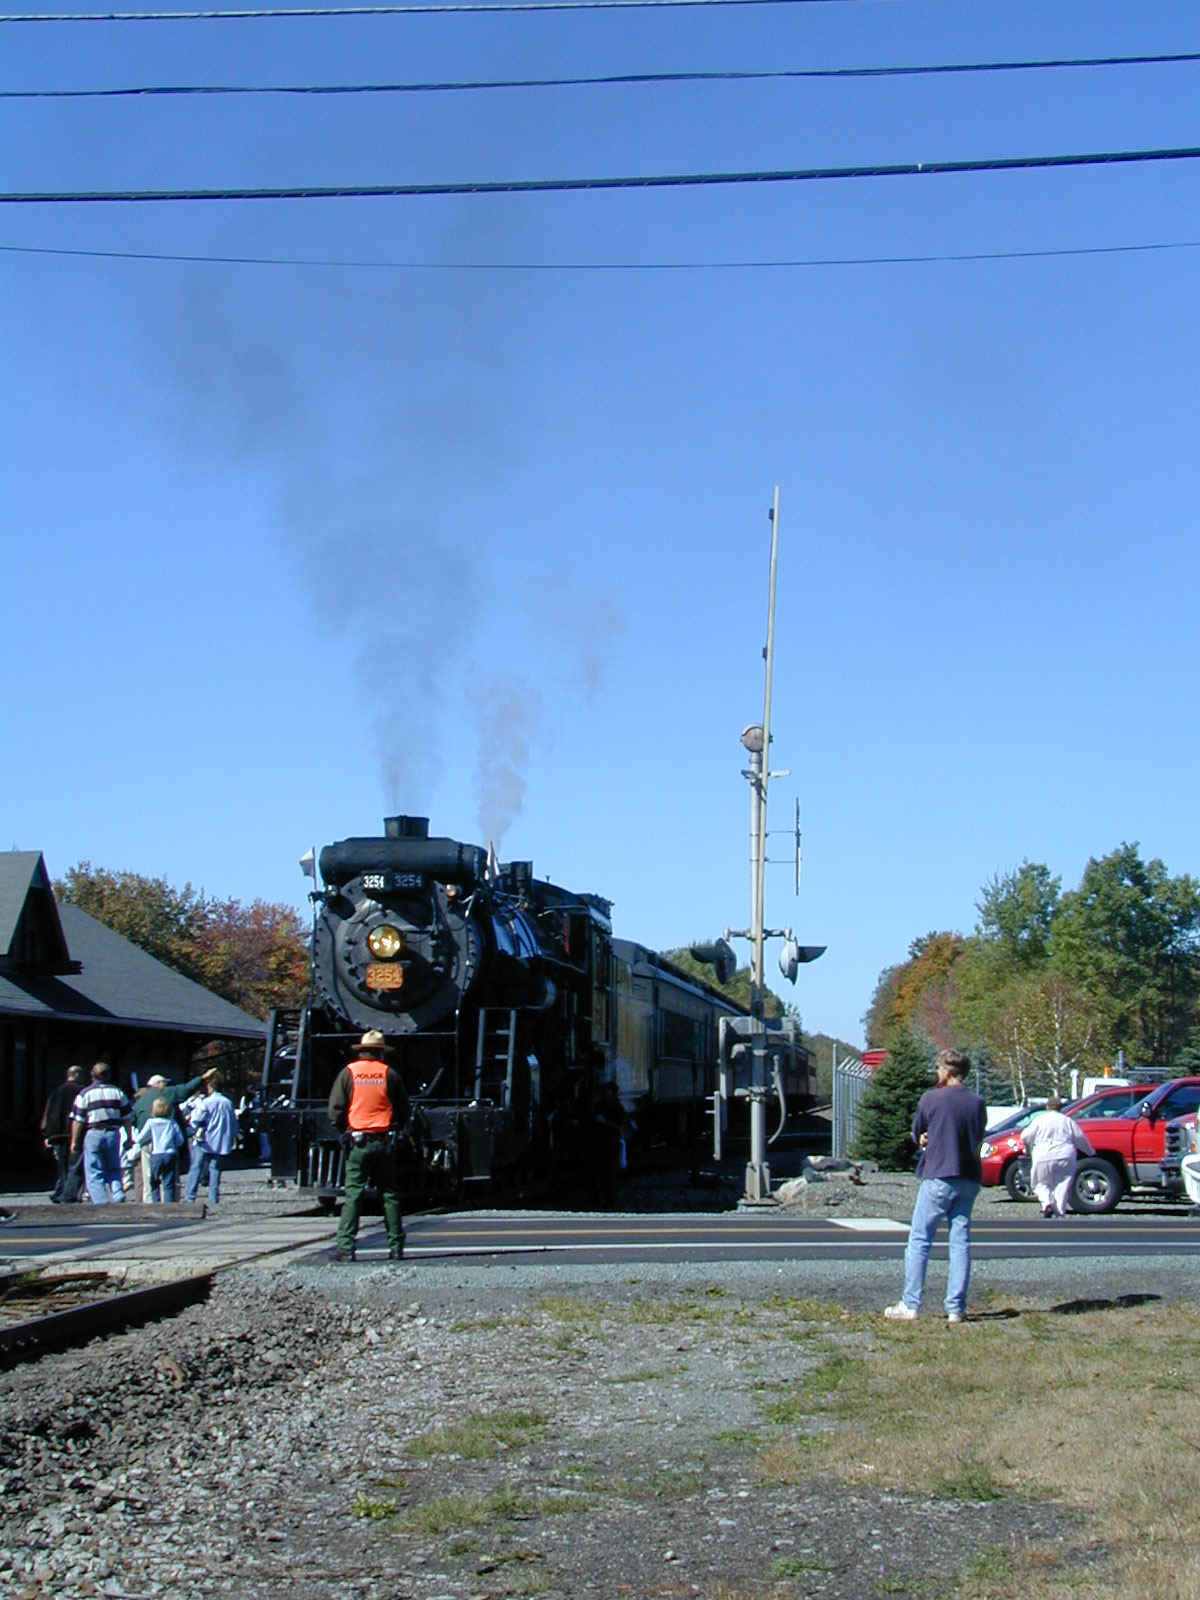 Steam at road crossing